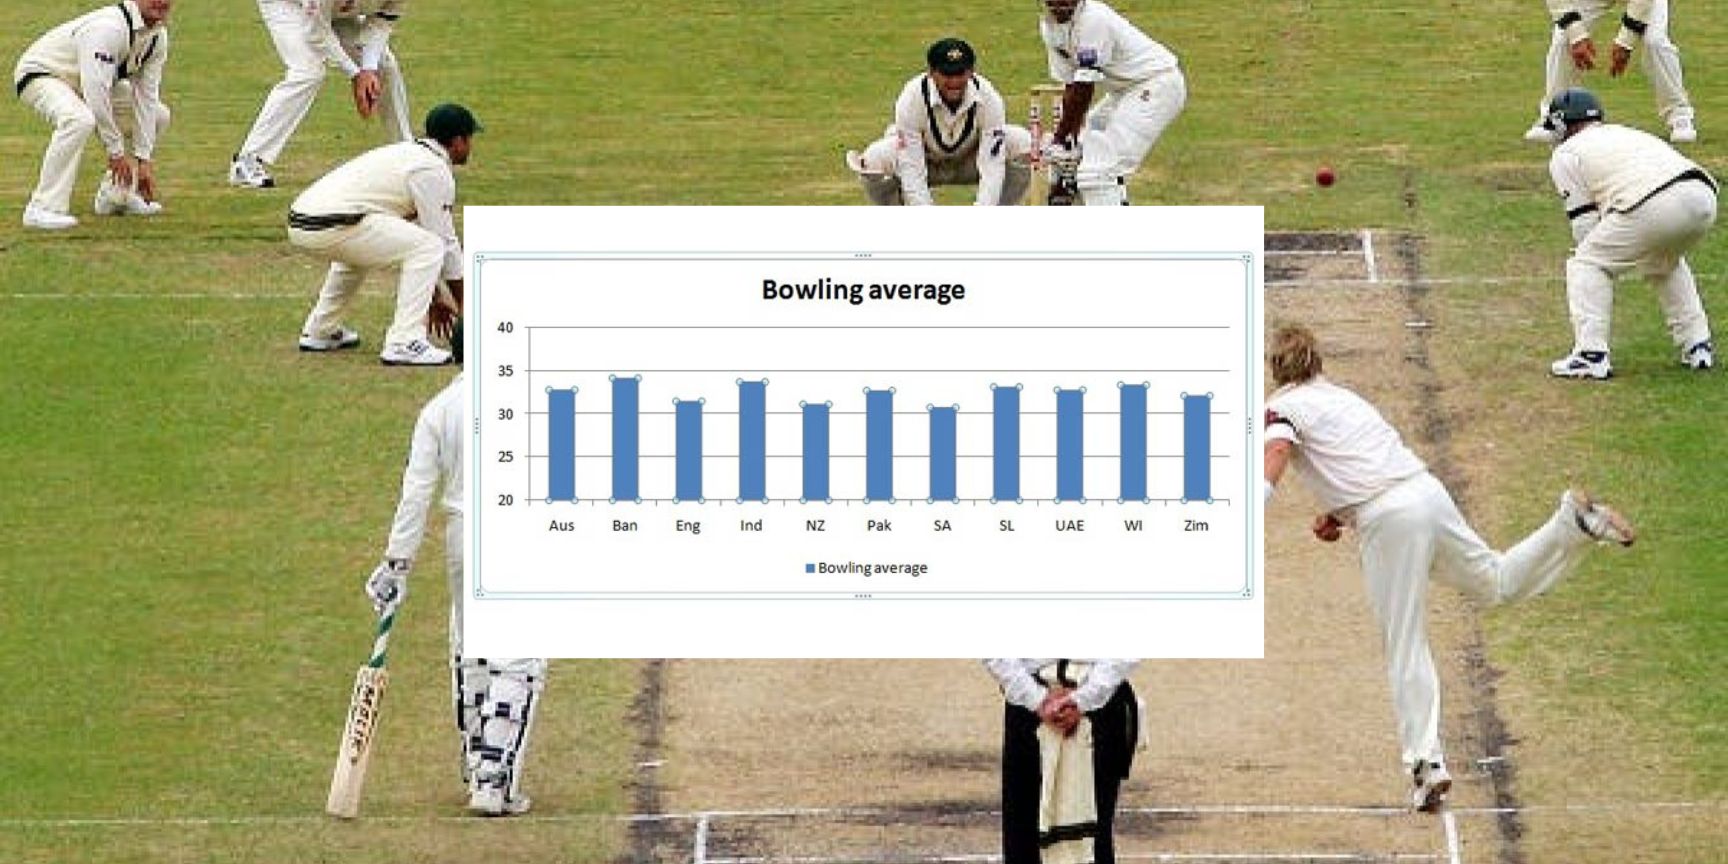 What is Bowling Average in cricket?